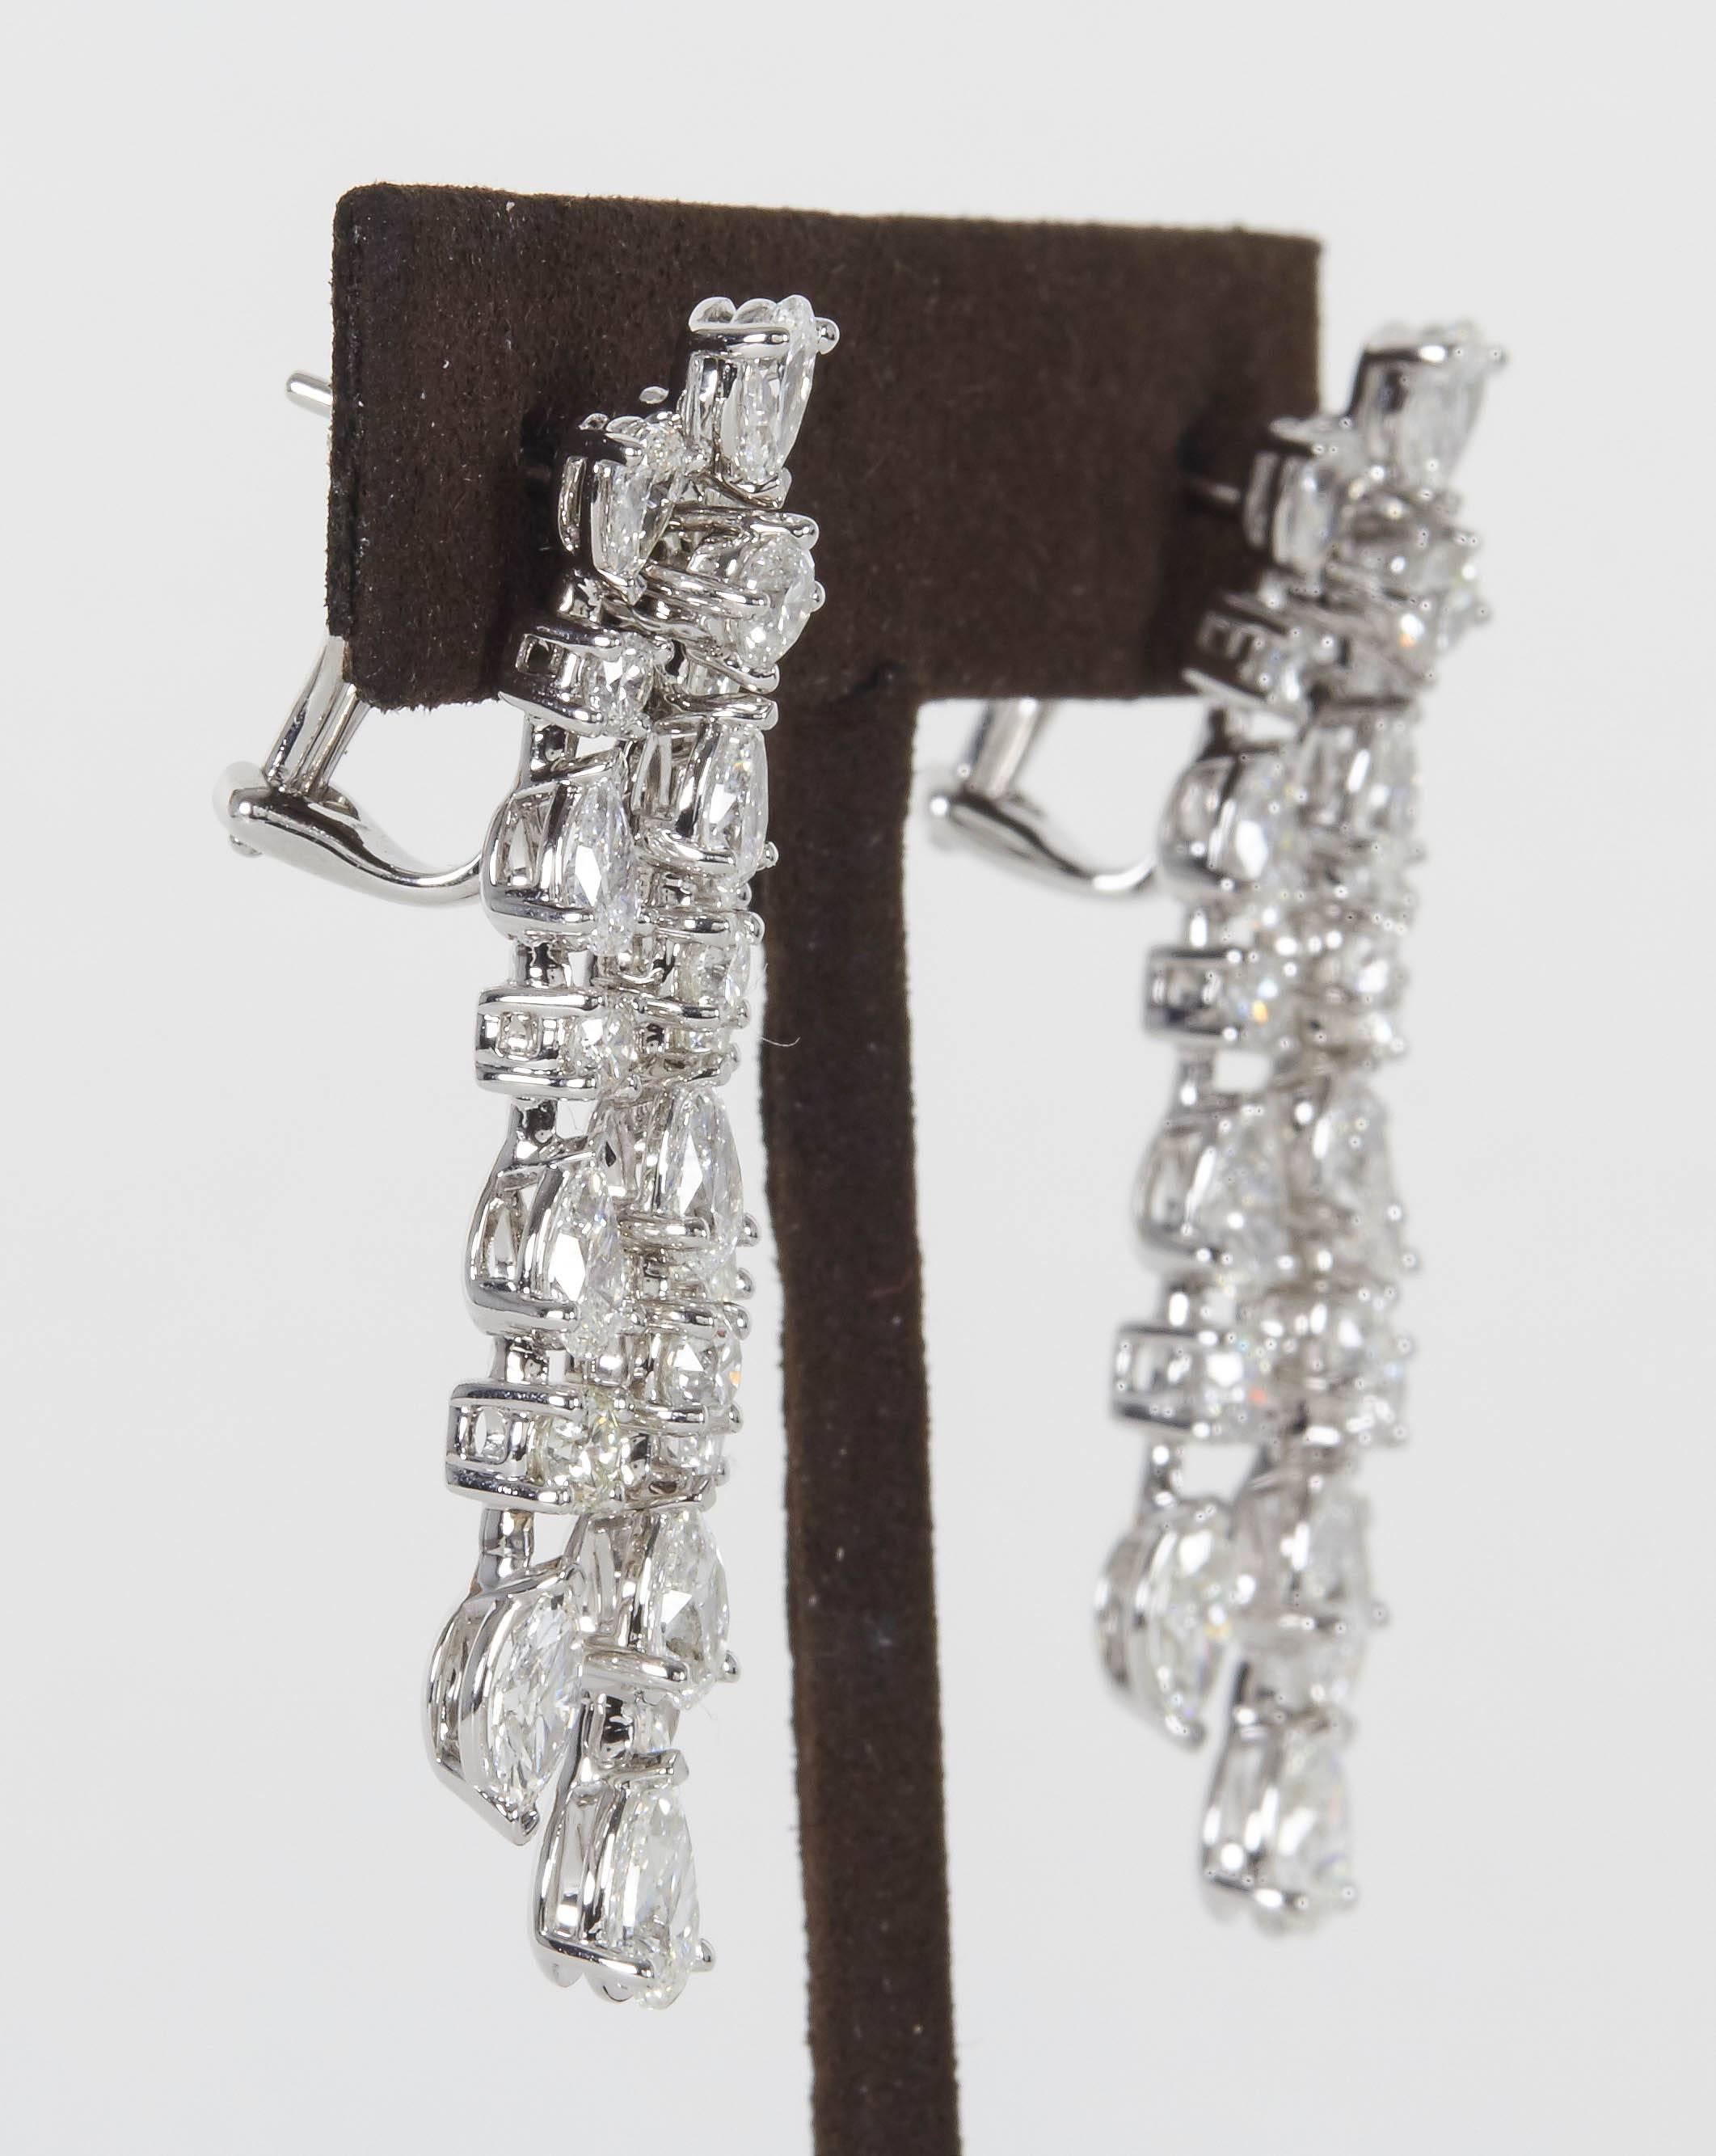 

A stunning pair of earrings featuring round, pear and marquise cut diamonds. 

9.91 carats of large sized diamonds F/G VS.

18k white gold 

They measure approximately 1.77 inches from the top to bottom of middle row. 

This earring will